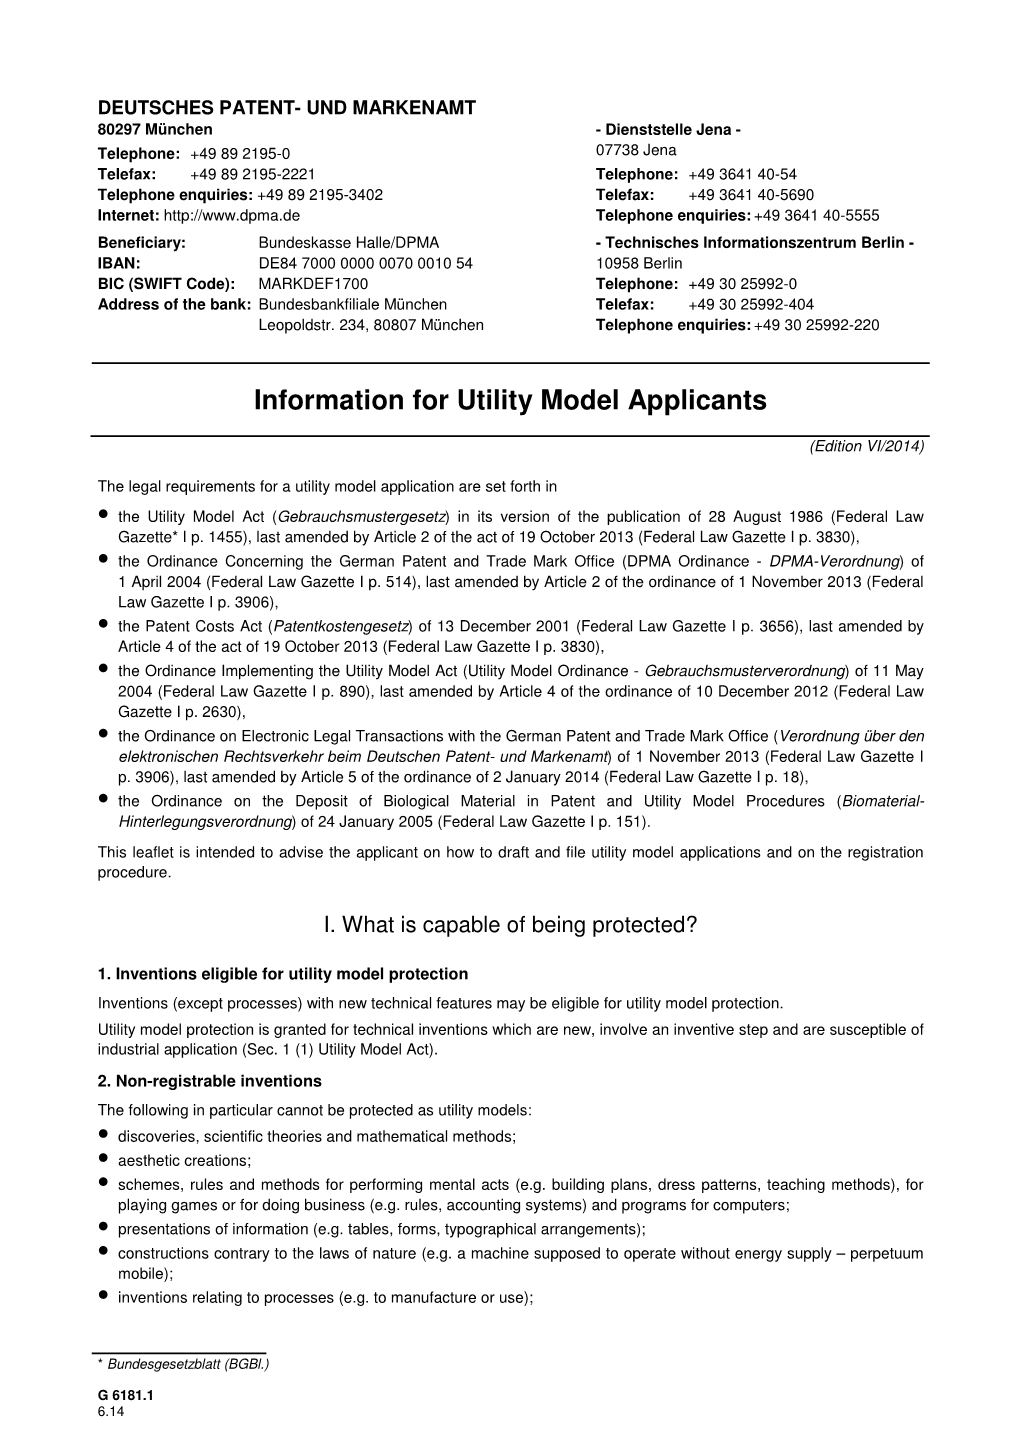 Information for Utility Model Applicants